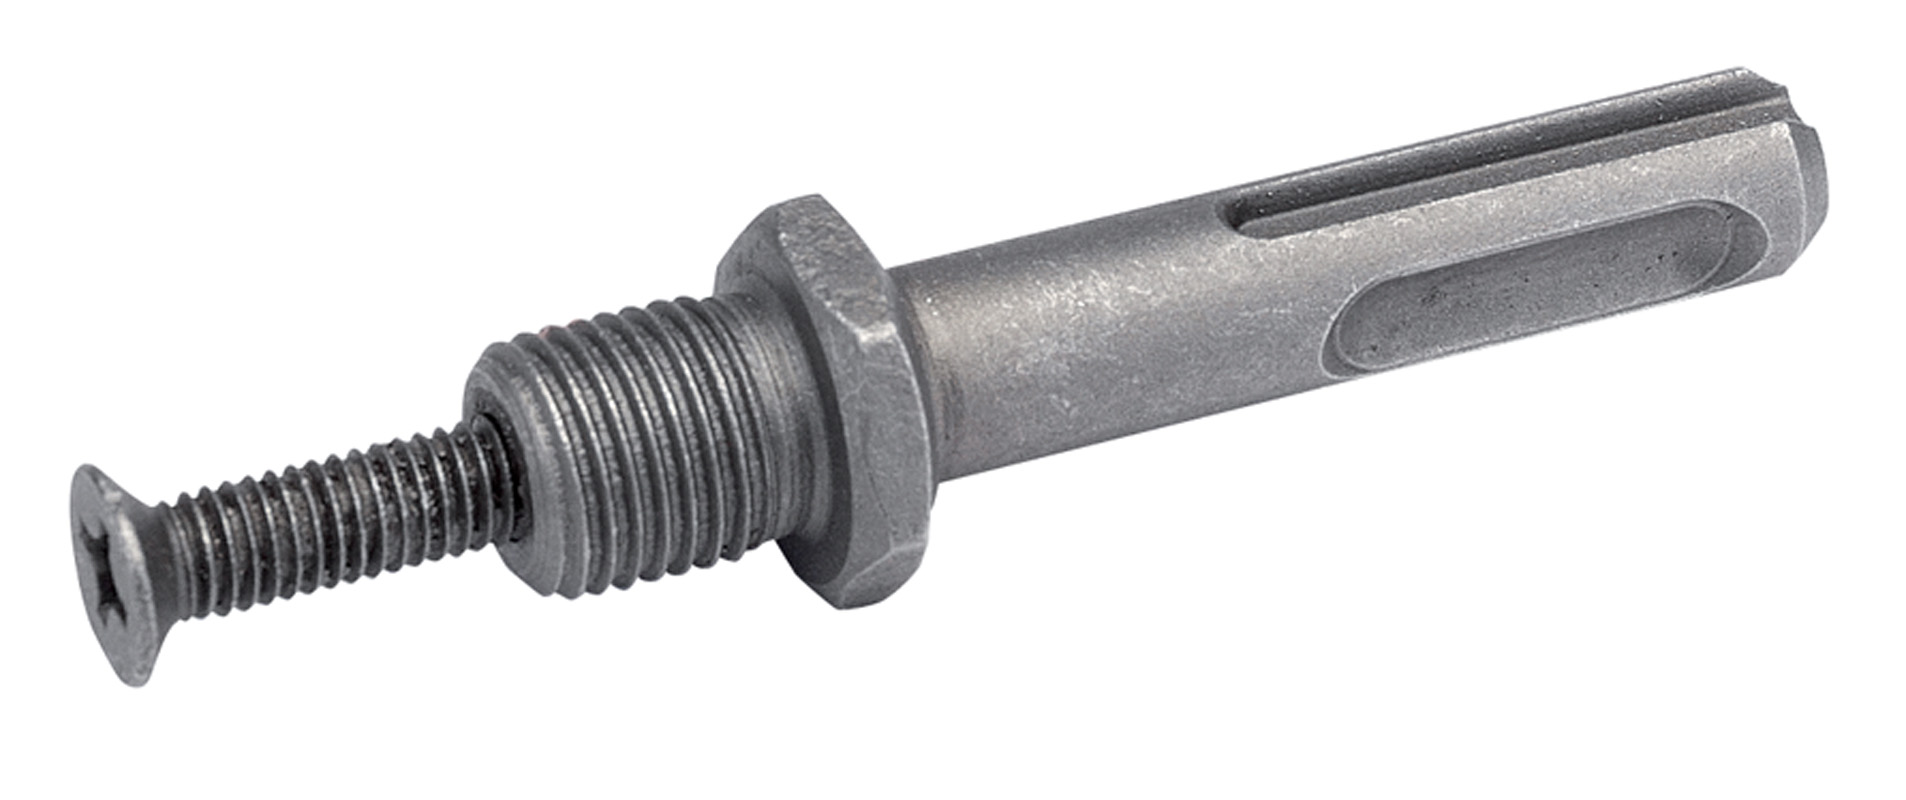 SDS+ Chuck Adaptor With Screw - 69782 